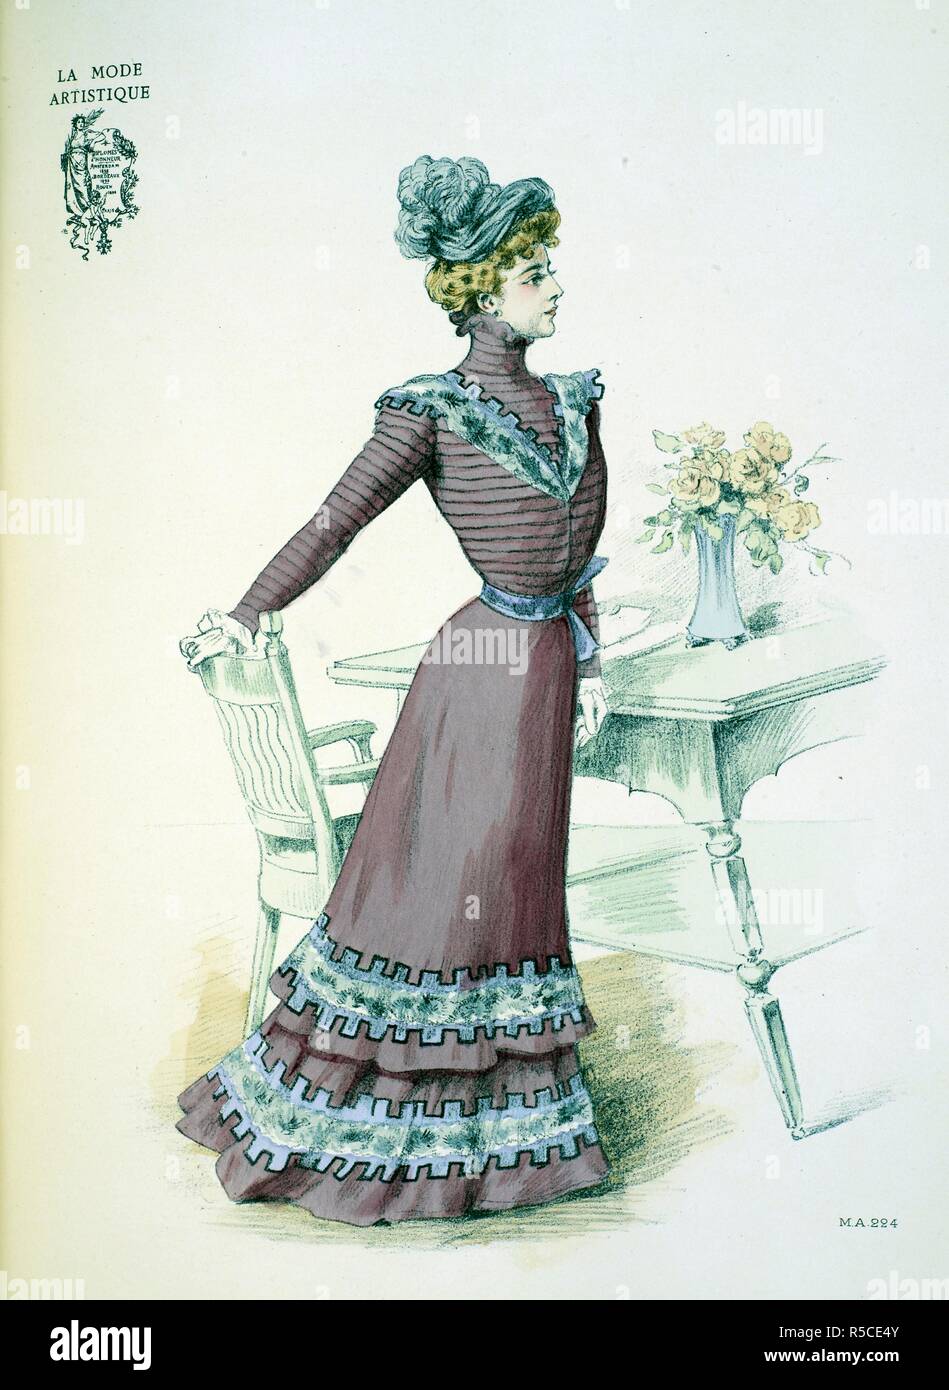 'A visiting dress of mulberry cloth created by Lejeune-Soinard ... The skirt is trimmed with two shaped flounces, nearly flat; in the centre of each is a band of chinchilla, surrounded by a sort of castellated Greek design in mauve velvet edged with black. The corsage and sleeves are entirely comopsed of pleats and we find again upon the bodice the trimming of the skirt in a smaller design. Waistband of the mauve, and toque of grey velvet'. . The Powder Puff [An English edition of 'La Mode artistique'.; 1898]. (London, England : 1898). Source: The Powder Puff Autumn and Winter plate 224. Stock Photo